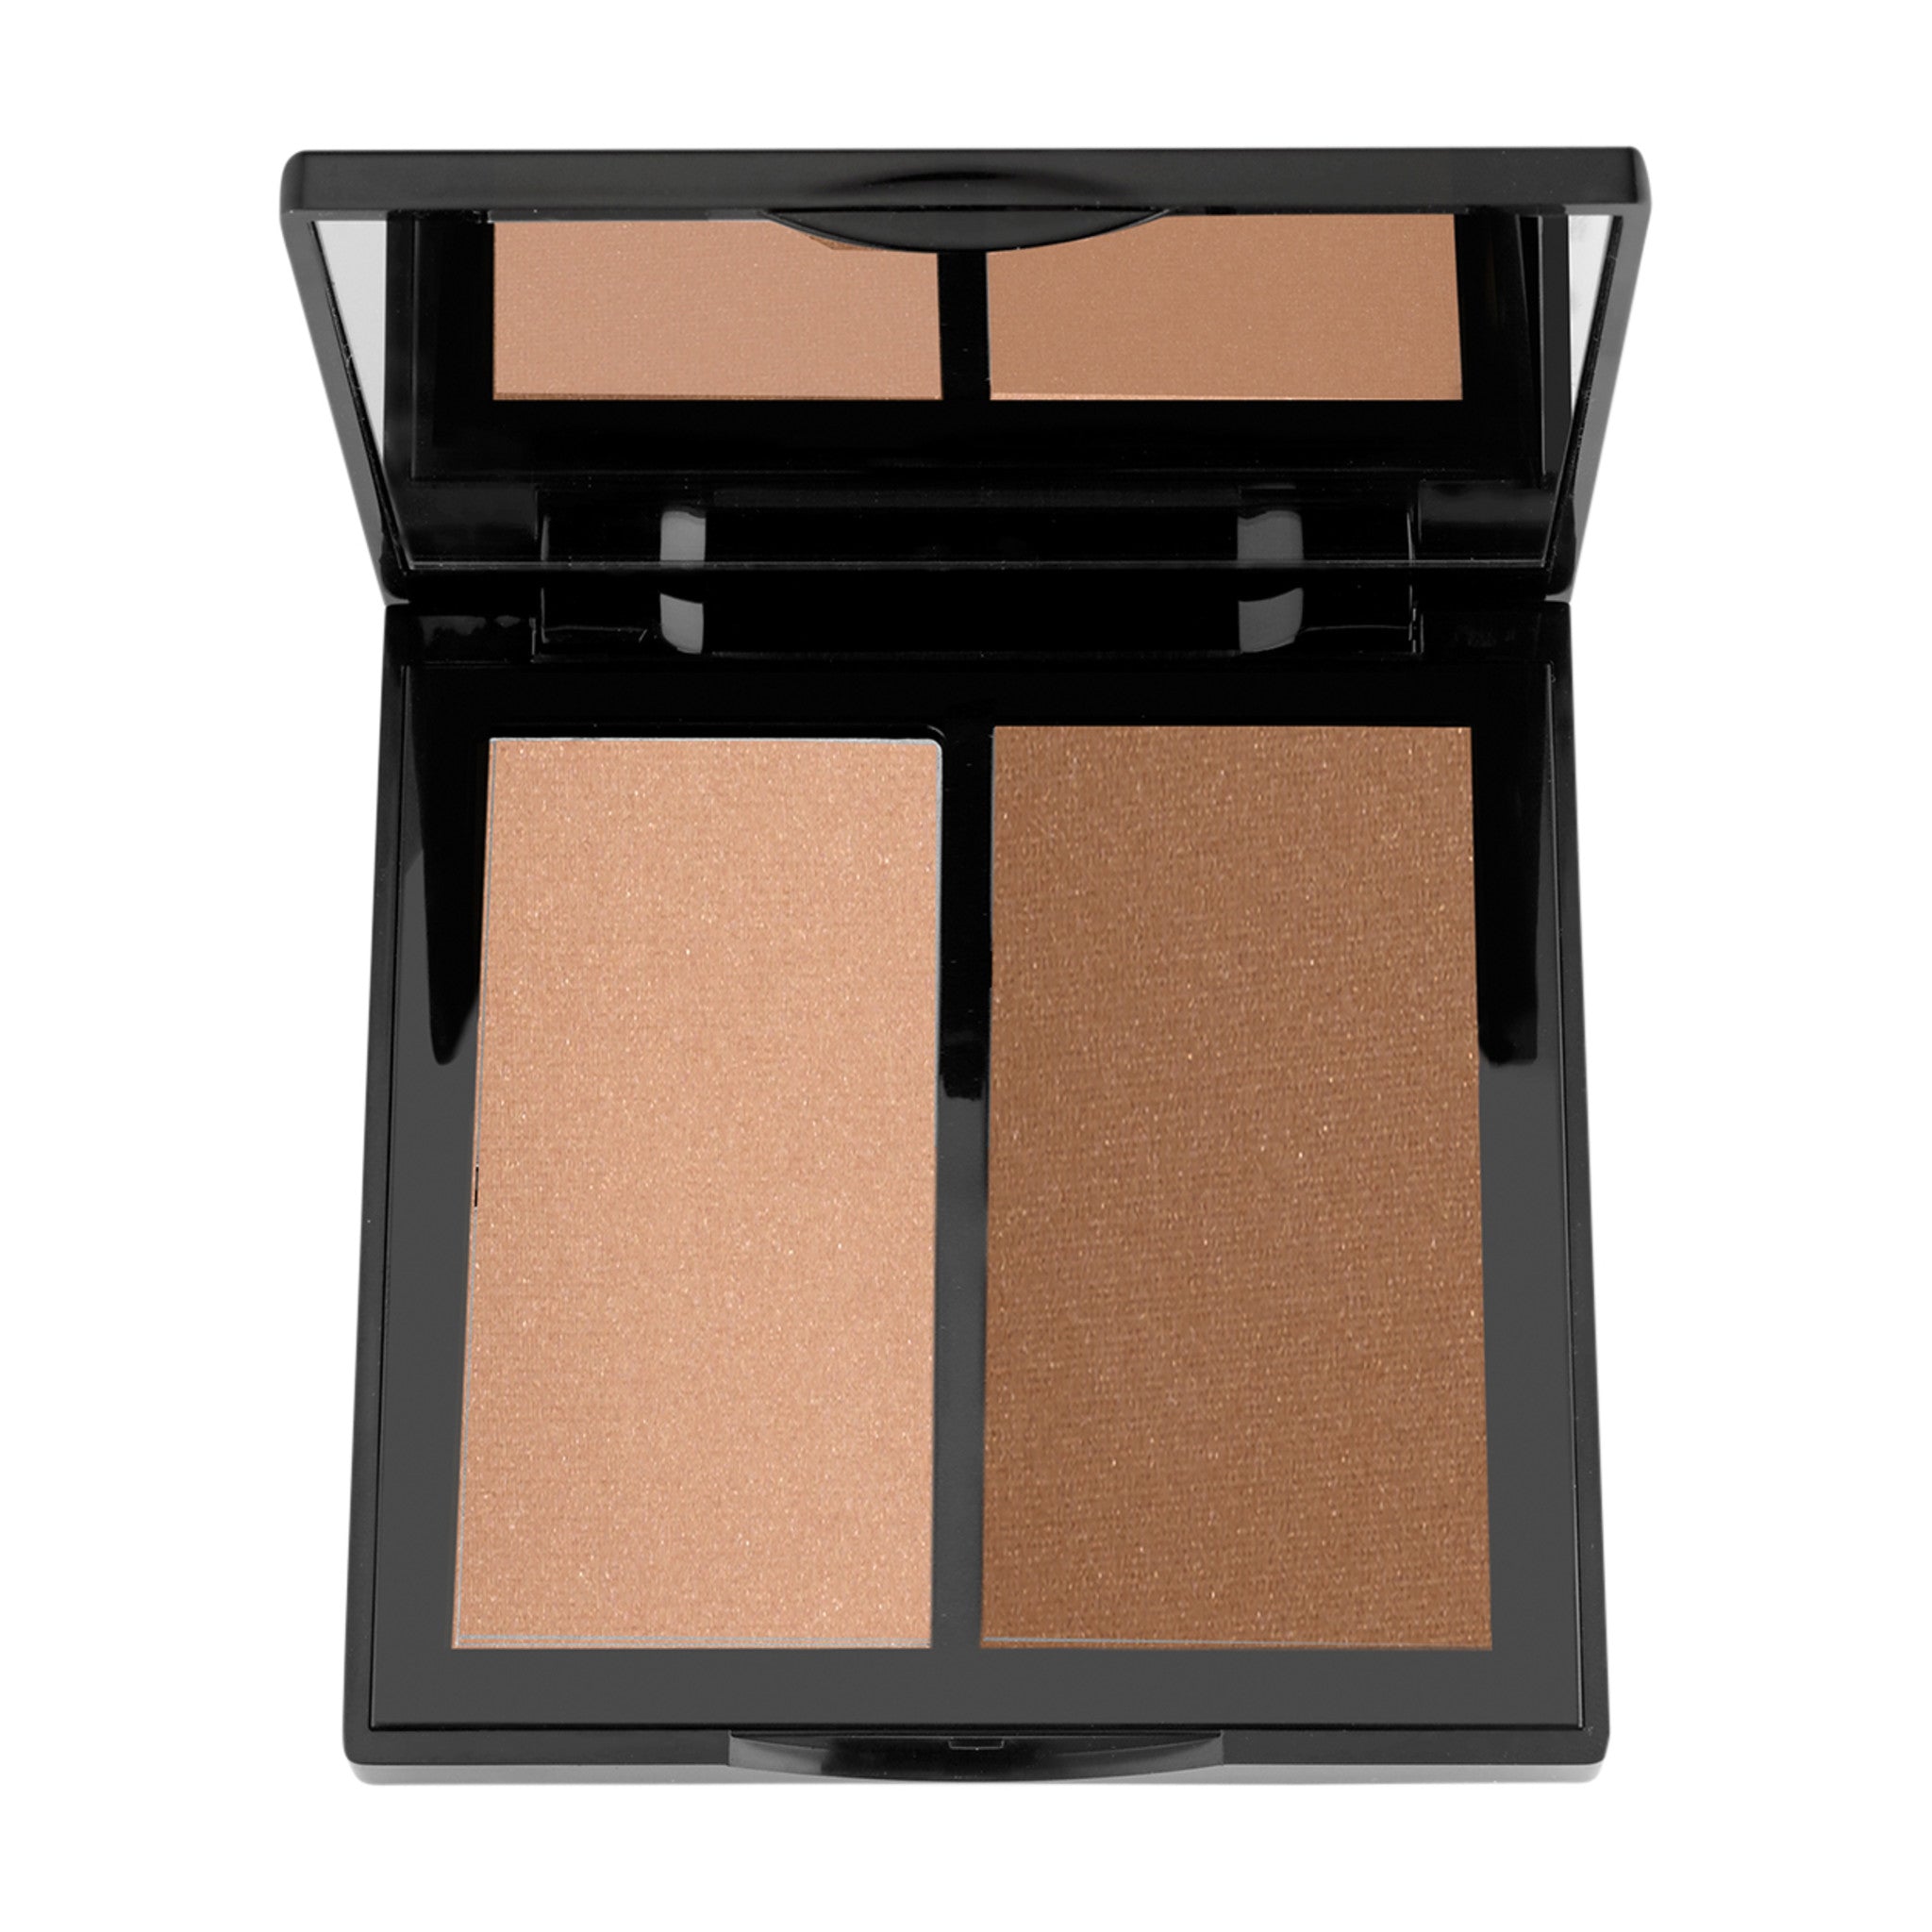 Trish McEvoy Light and Lift Face Color Duo main image. This product is in the color multi, for light and medium and deep complexions